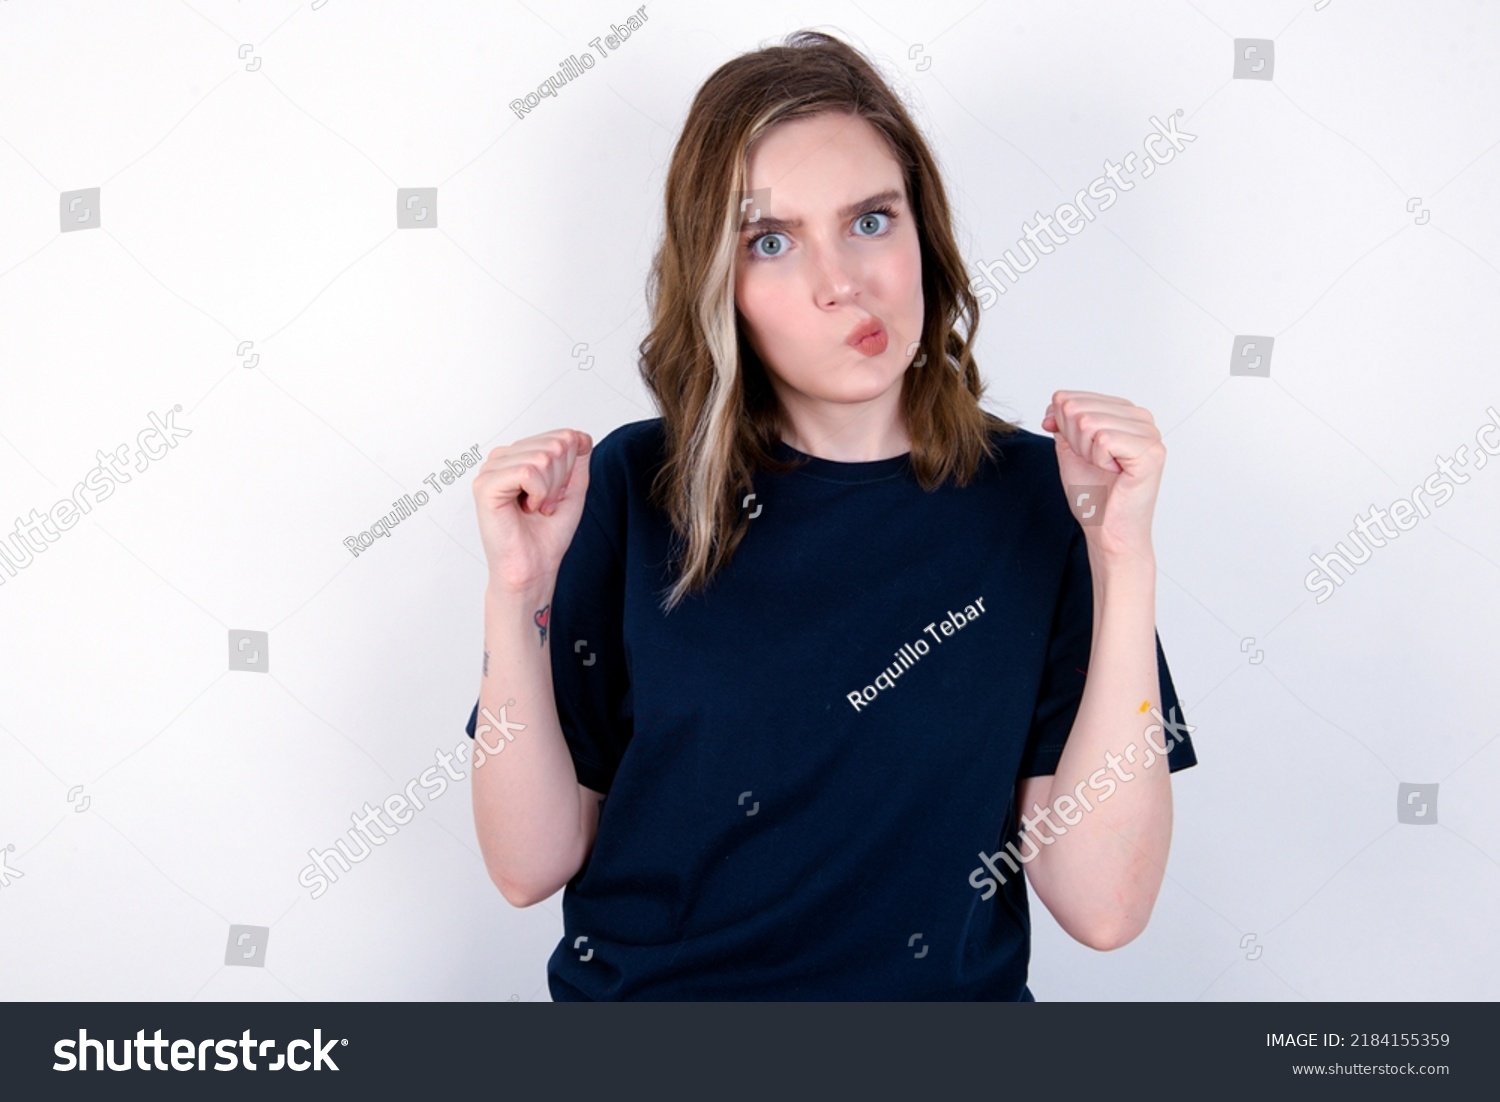 Irritated young caucasian woman wearing black T-shirt over white background blows cheeks with anger and raises clenched fists expresses rage and aggressive emotions. Furious model #2184155359